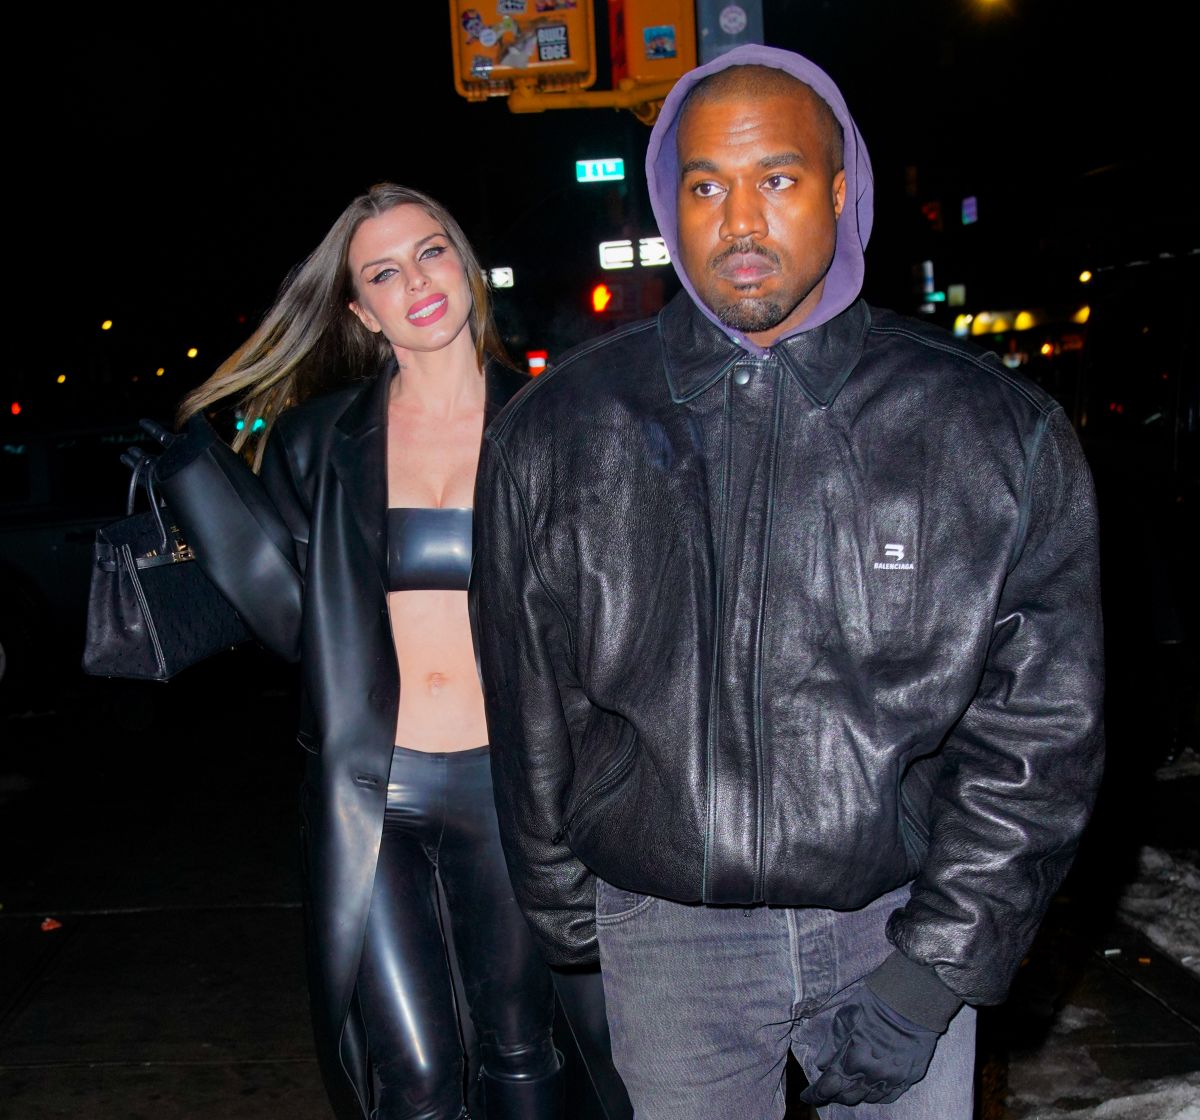 Julia Fox And Kanye West Arrives Lucien On Her 32nd Birthday New York